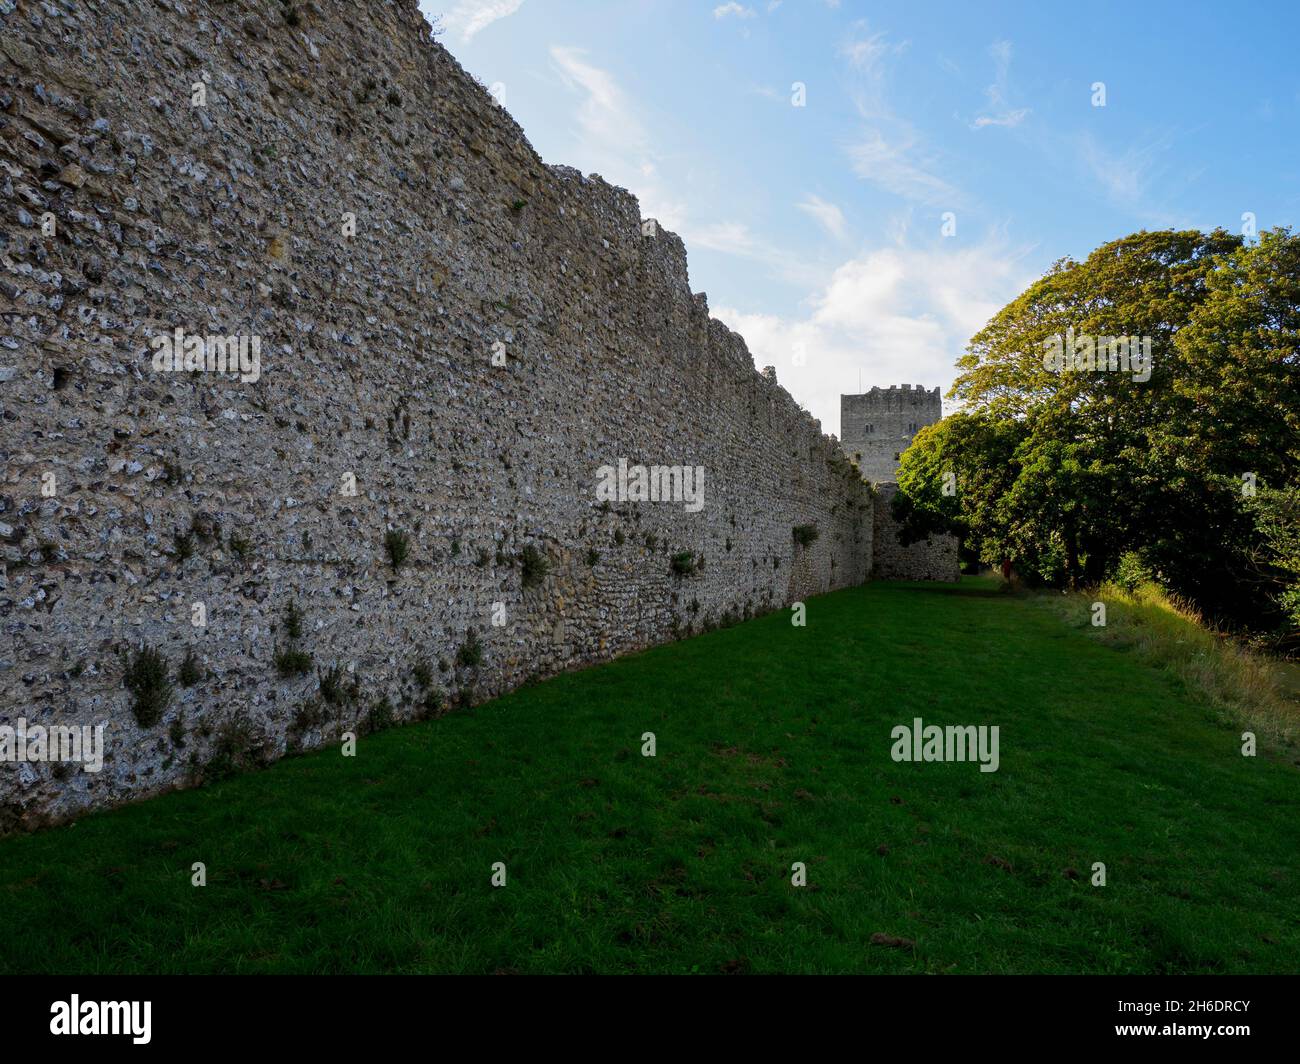 Outer wall of Portchester Castle, Portsmouth, Hampshire, UK Stock Photo